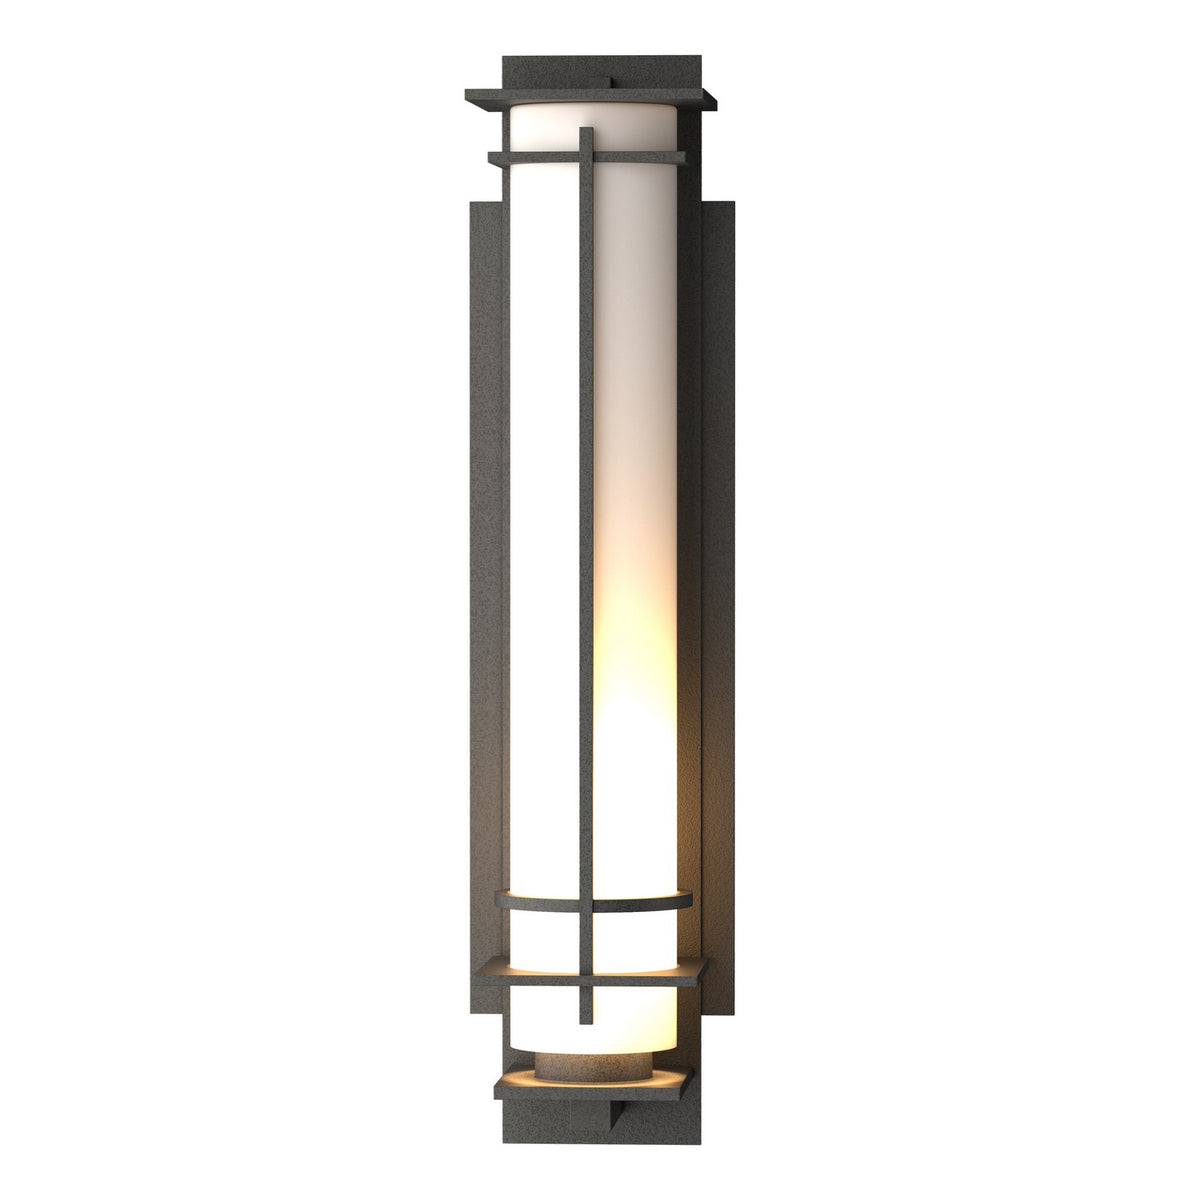 Hubbardton Forge - 307861-SKT-20-GG0189 - One Light Outdoor Wall Sconce - After Hours - Coastal Natural Iron